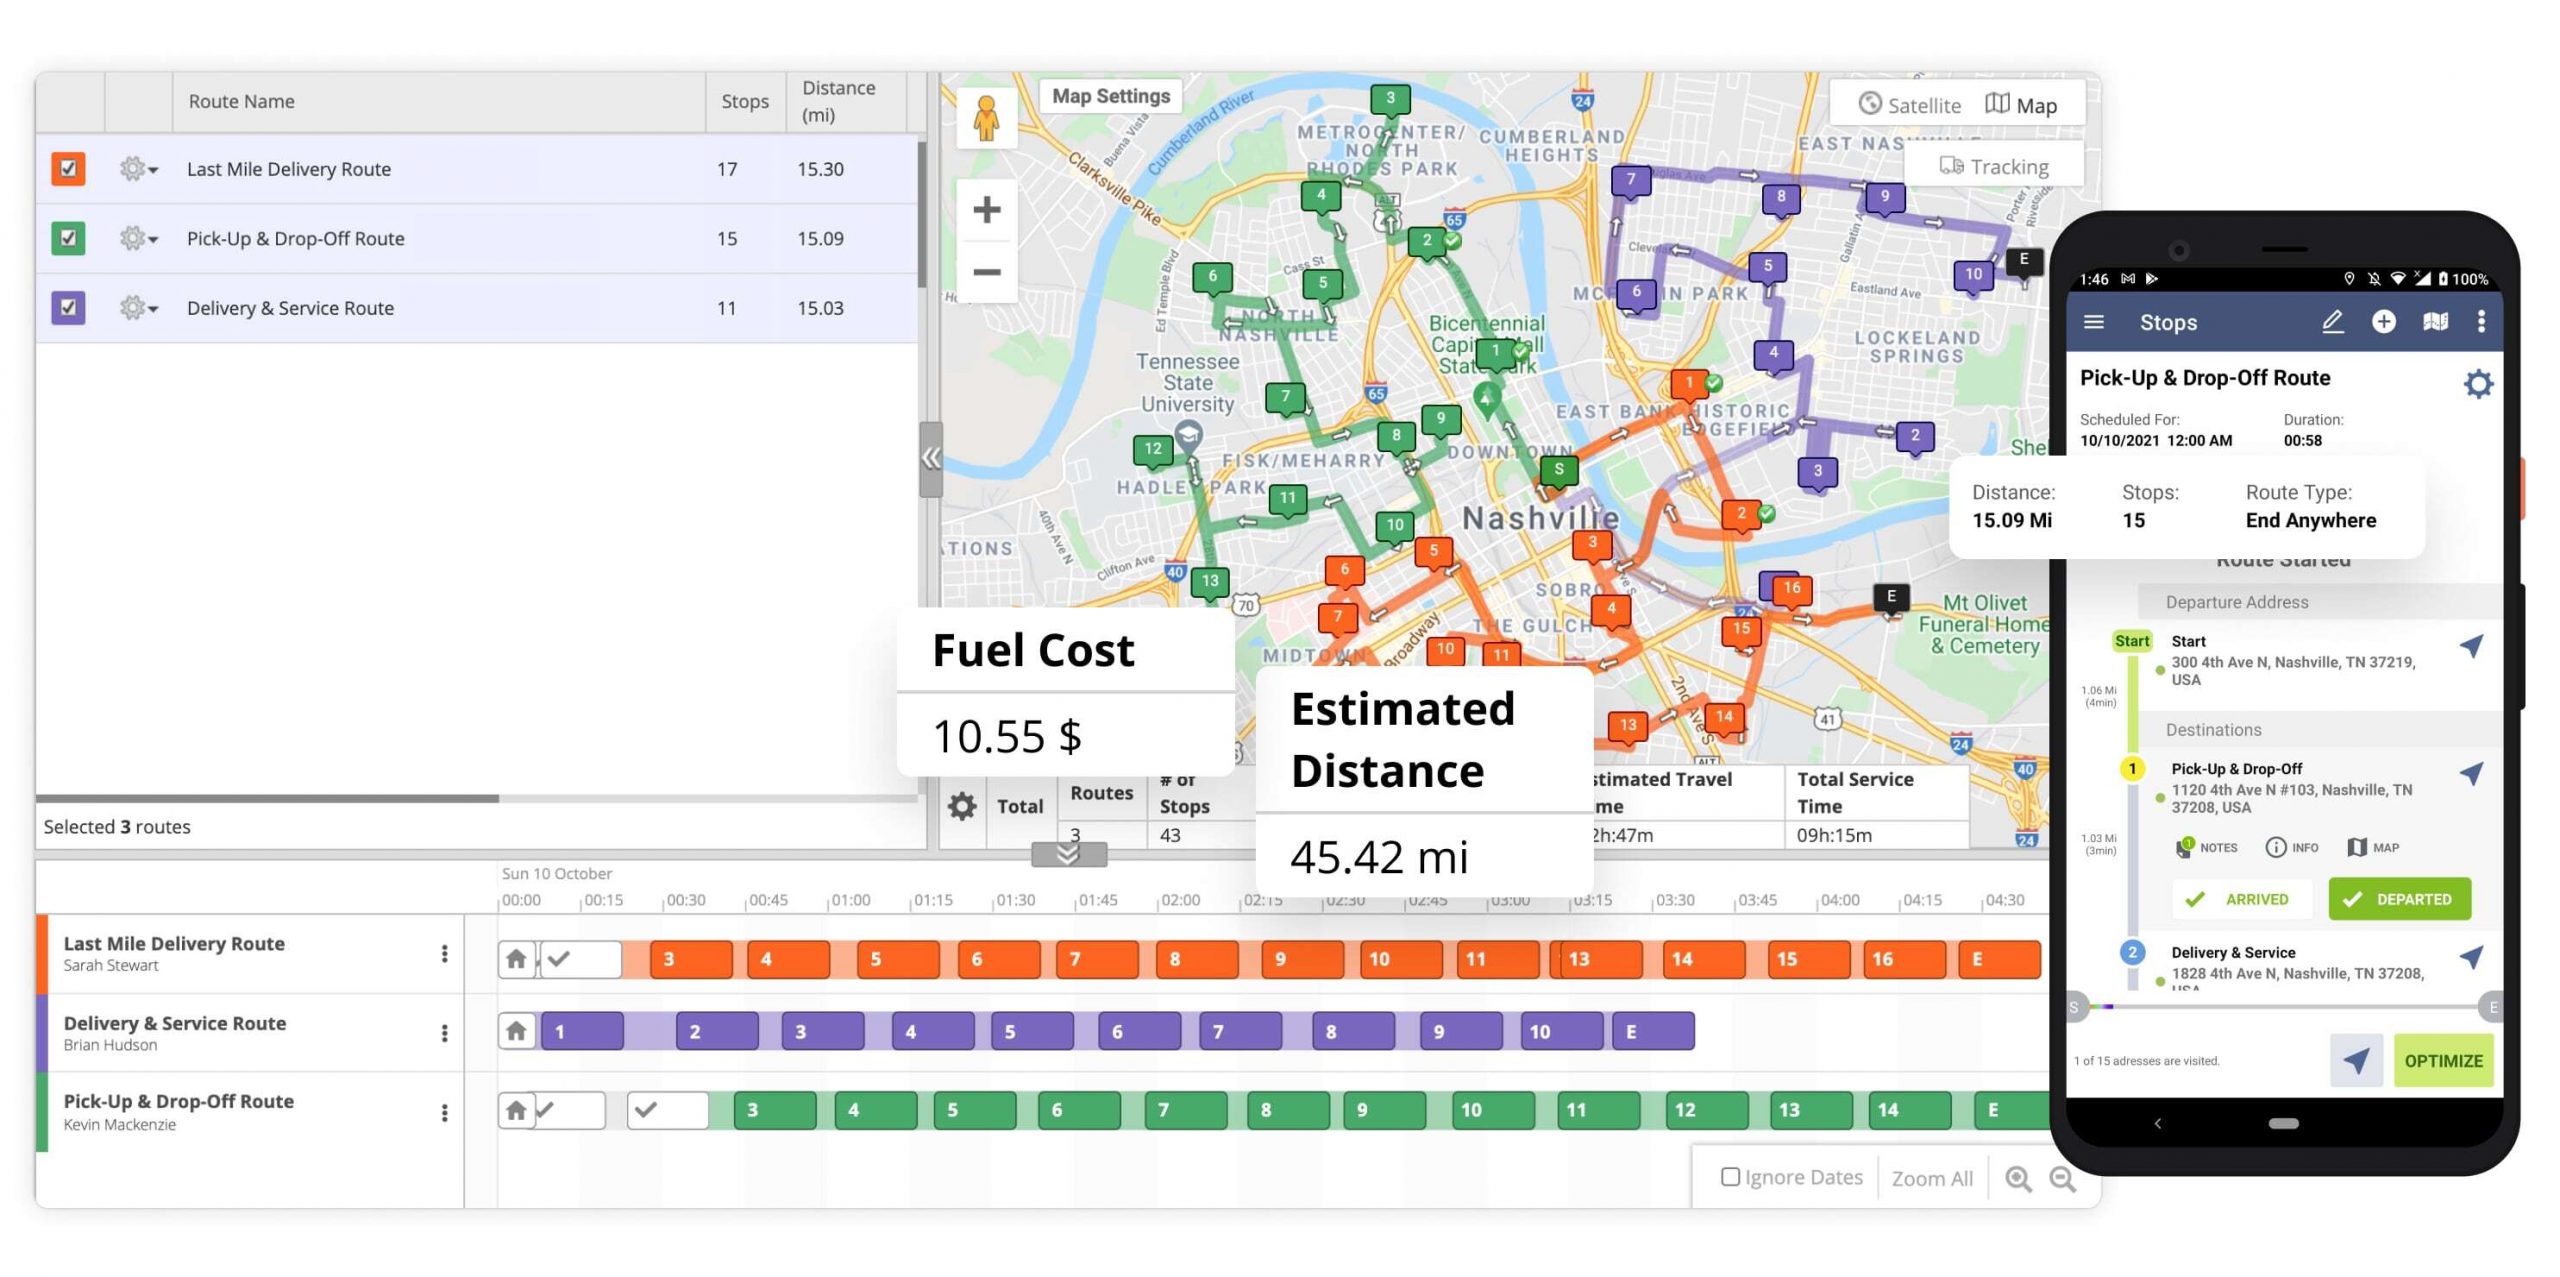 Fuel cost analysis of a planned route on Route4Me's route optimization software.